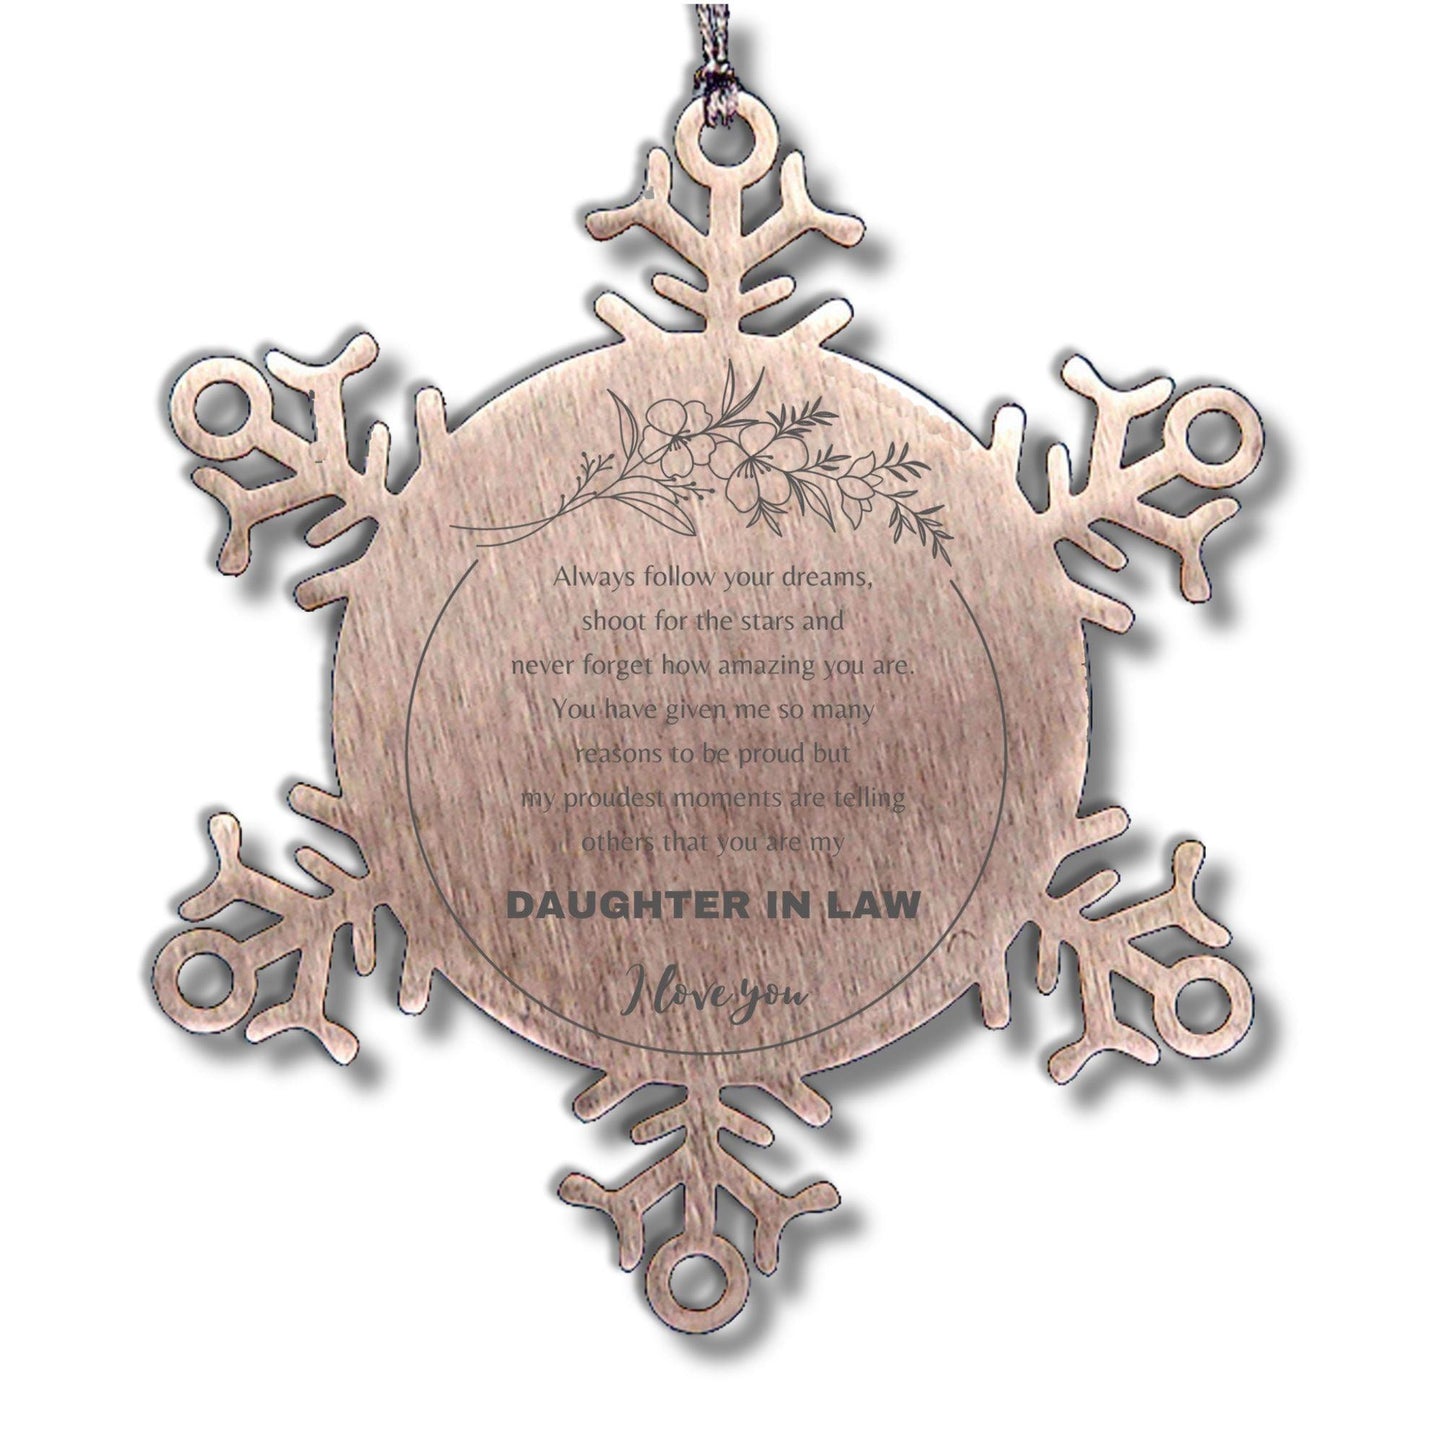 Snowflake Ornament for Daughter Present, Daughter Always follow your dreams, never forget how amazing you are, Daughter Christmas Gifts Decorations for Girls Boys Teen Men Women - Mallard Moon Gift Shop